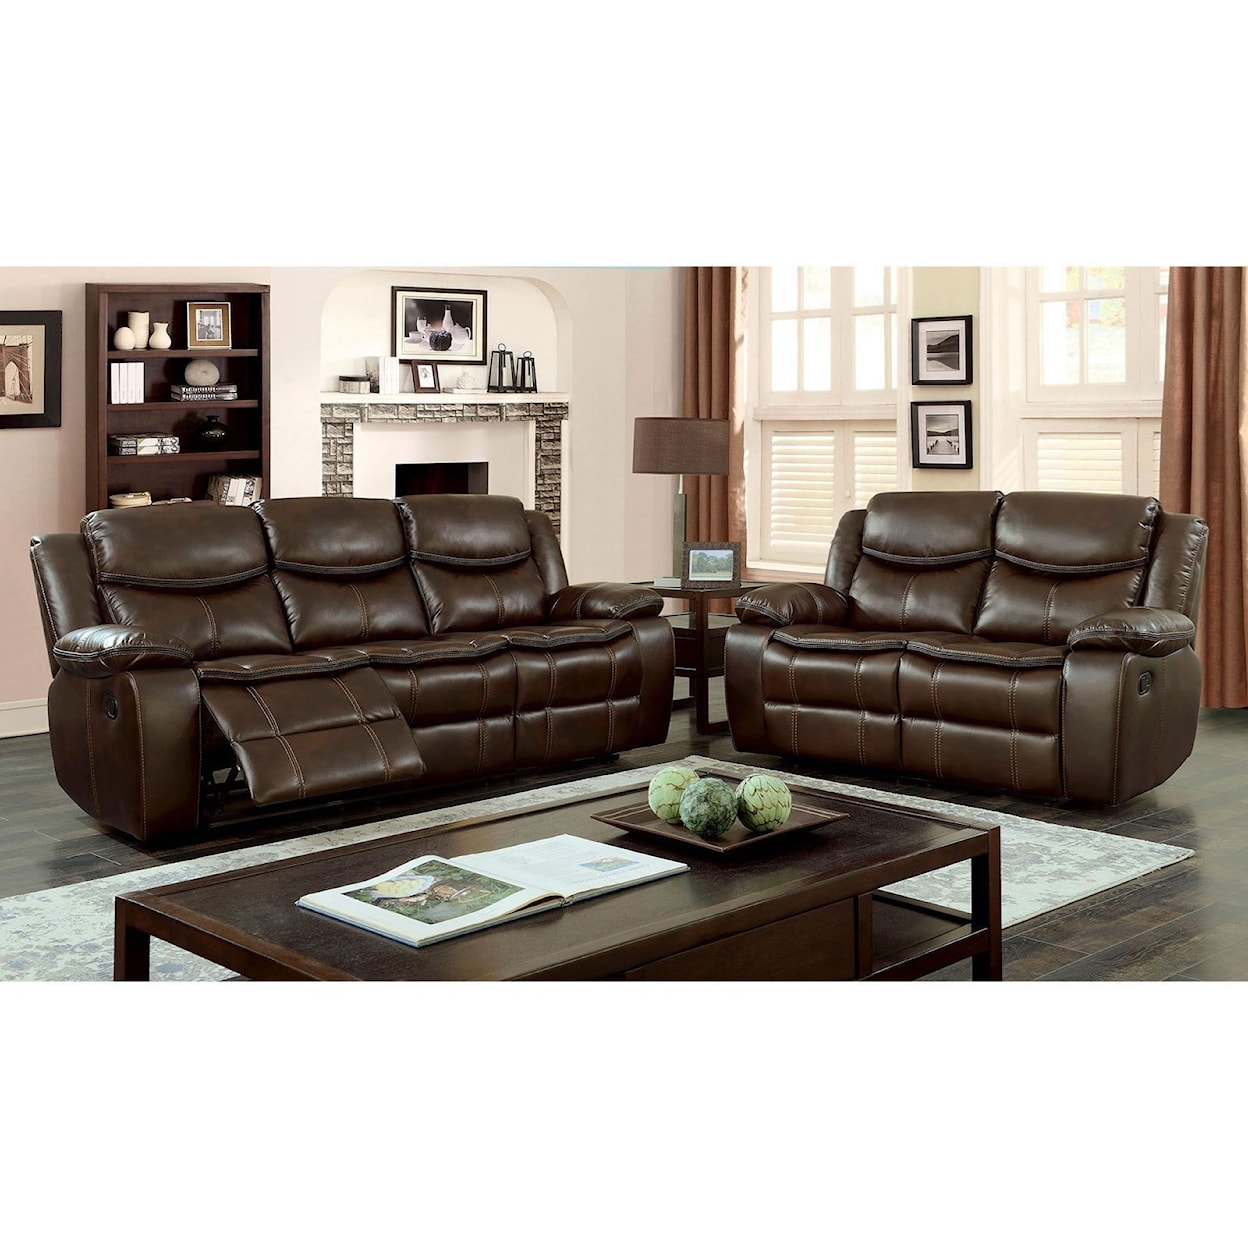 Furniture of America Pollux Reclining Sofa and Loveseat